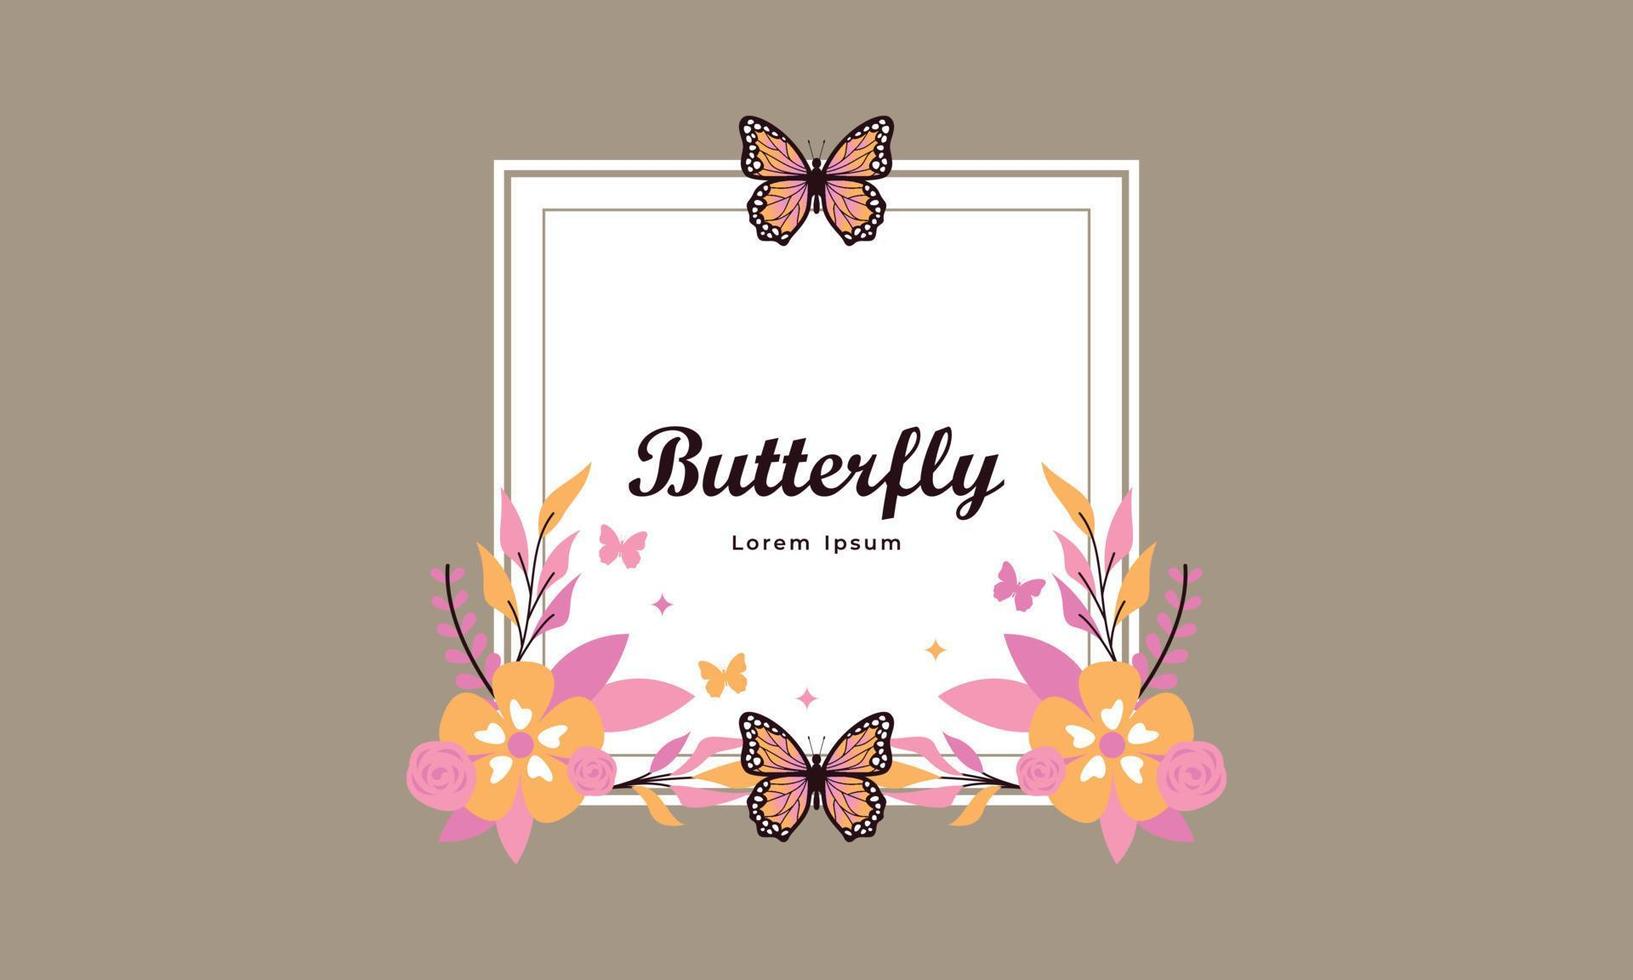 Wreath template and butterfly logo in watercolor style vector